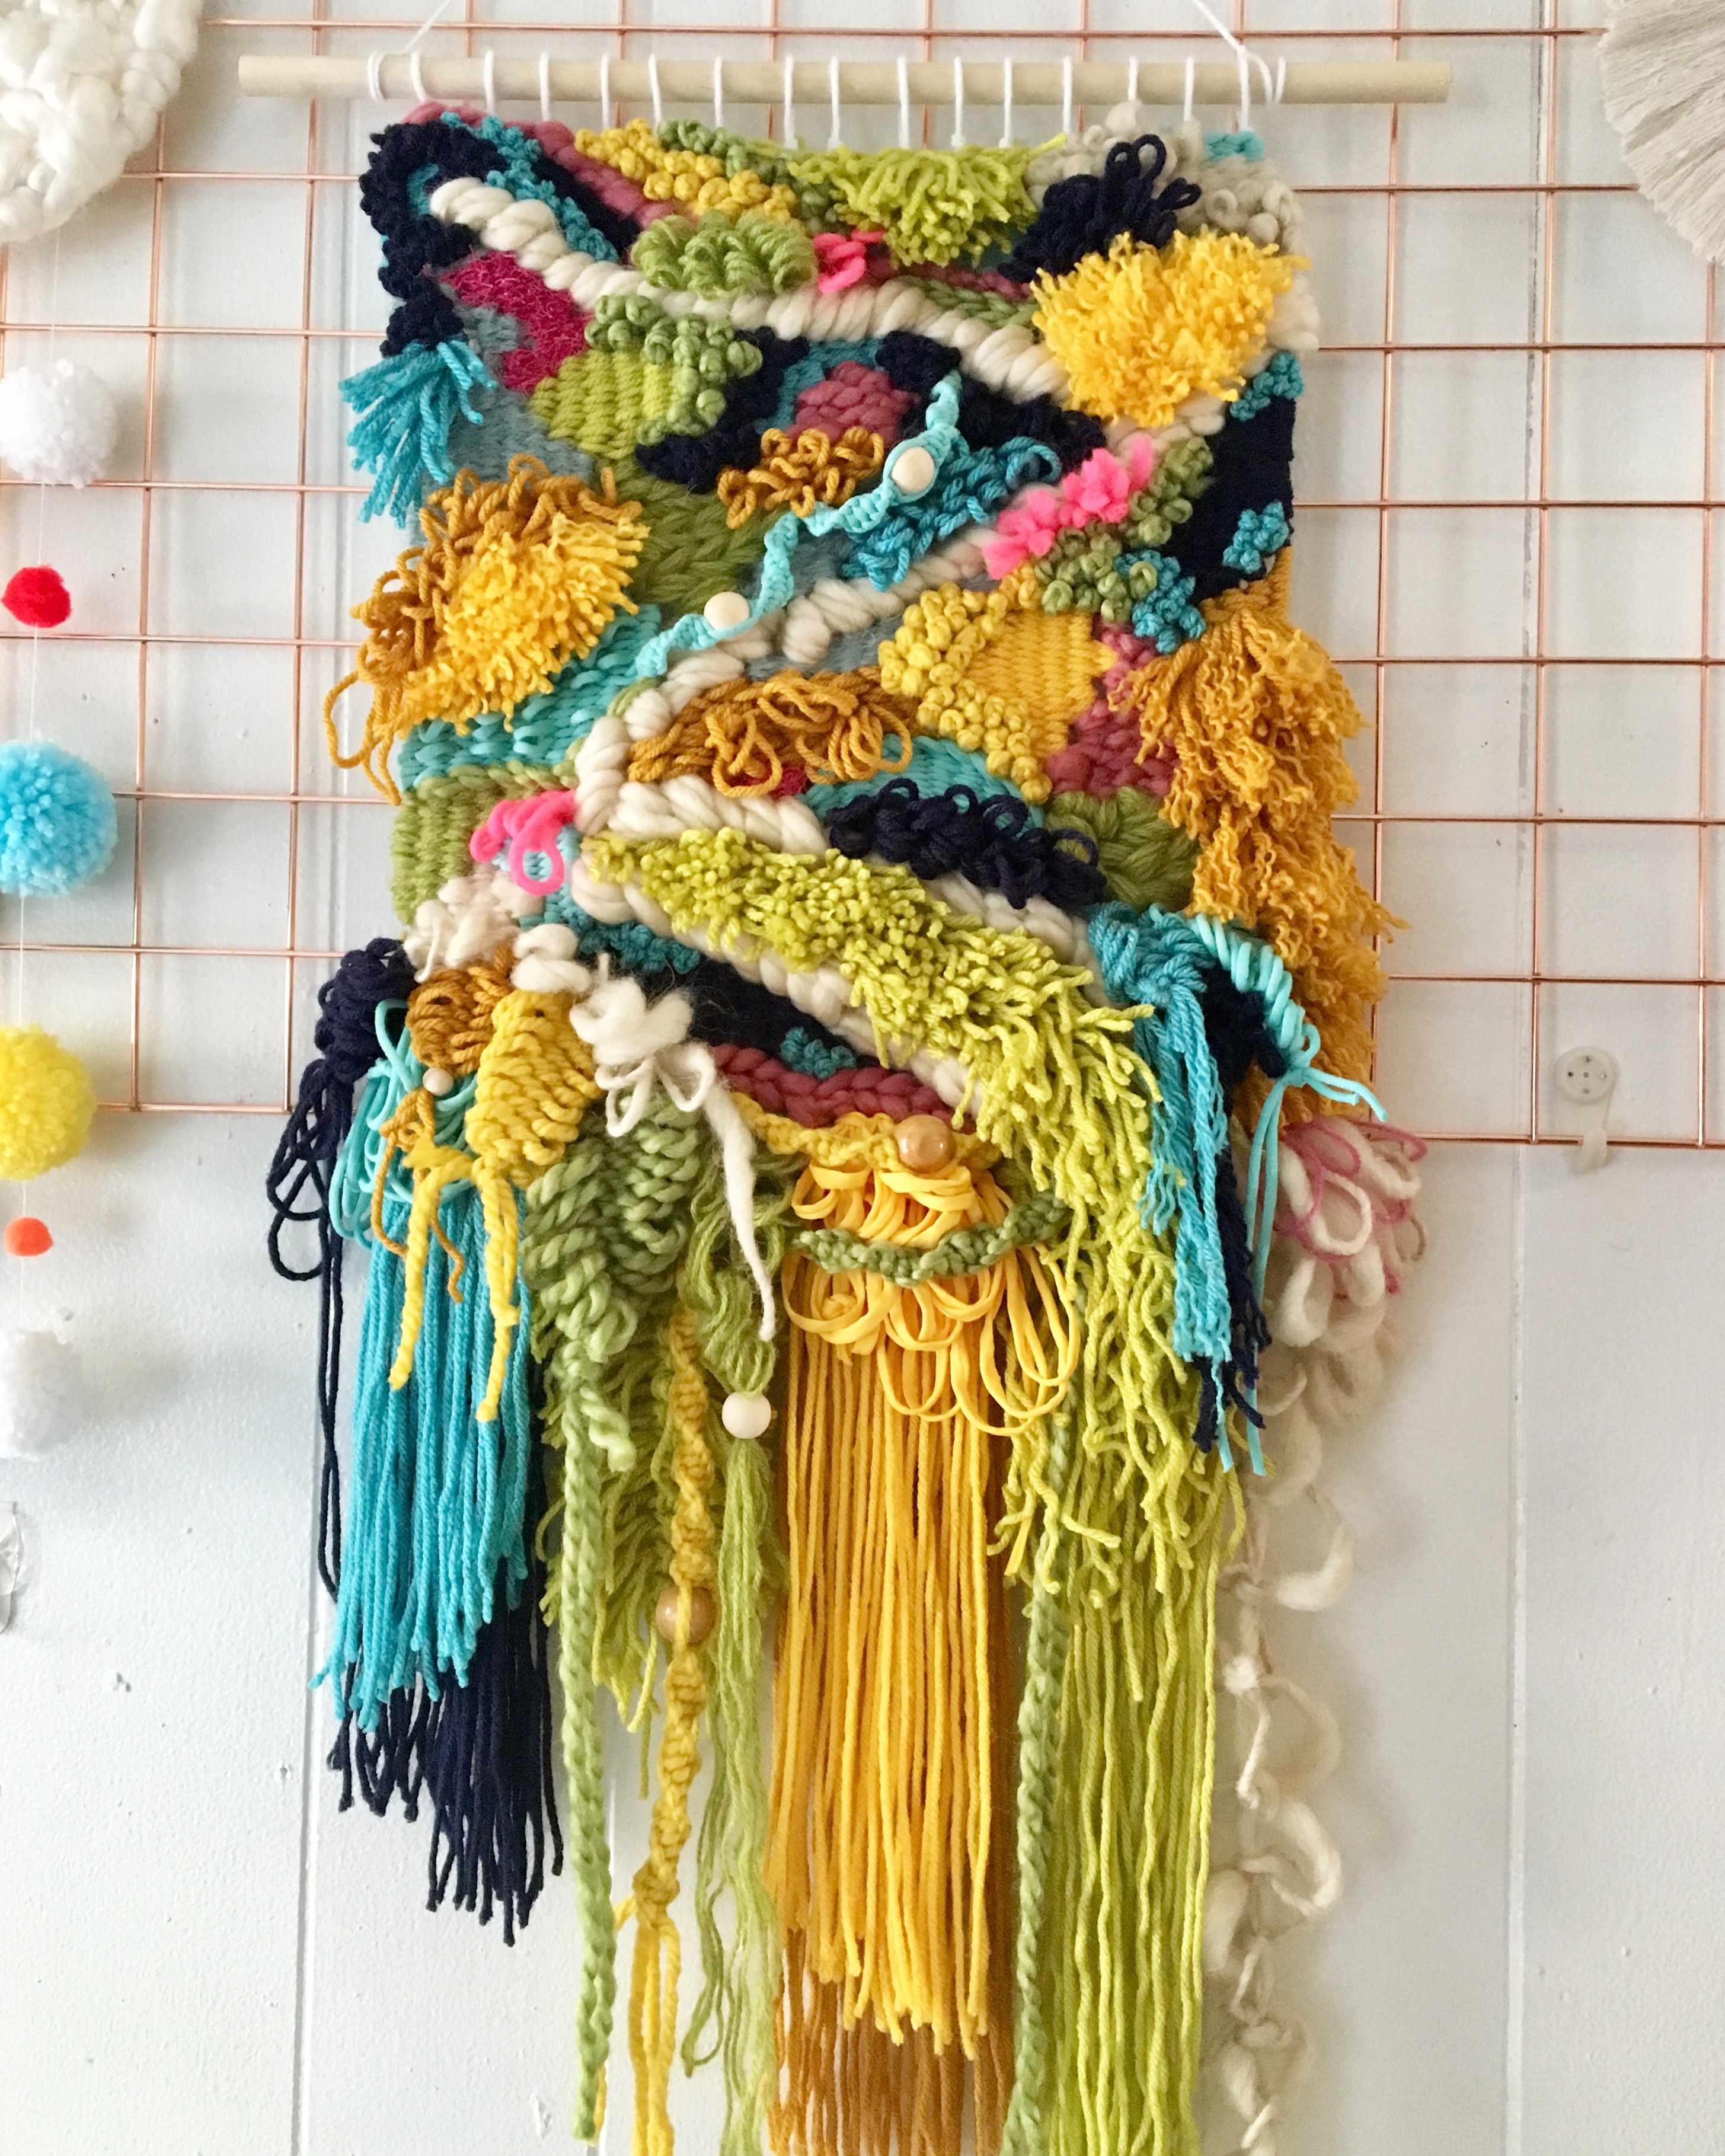 The Freshness of Spring Weaving Wall Hanging- Shop at DipDipLoom